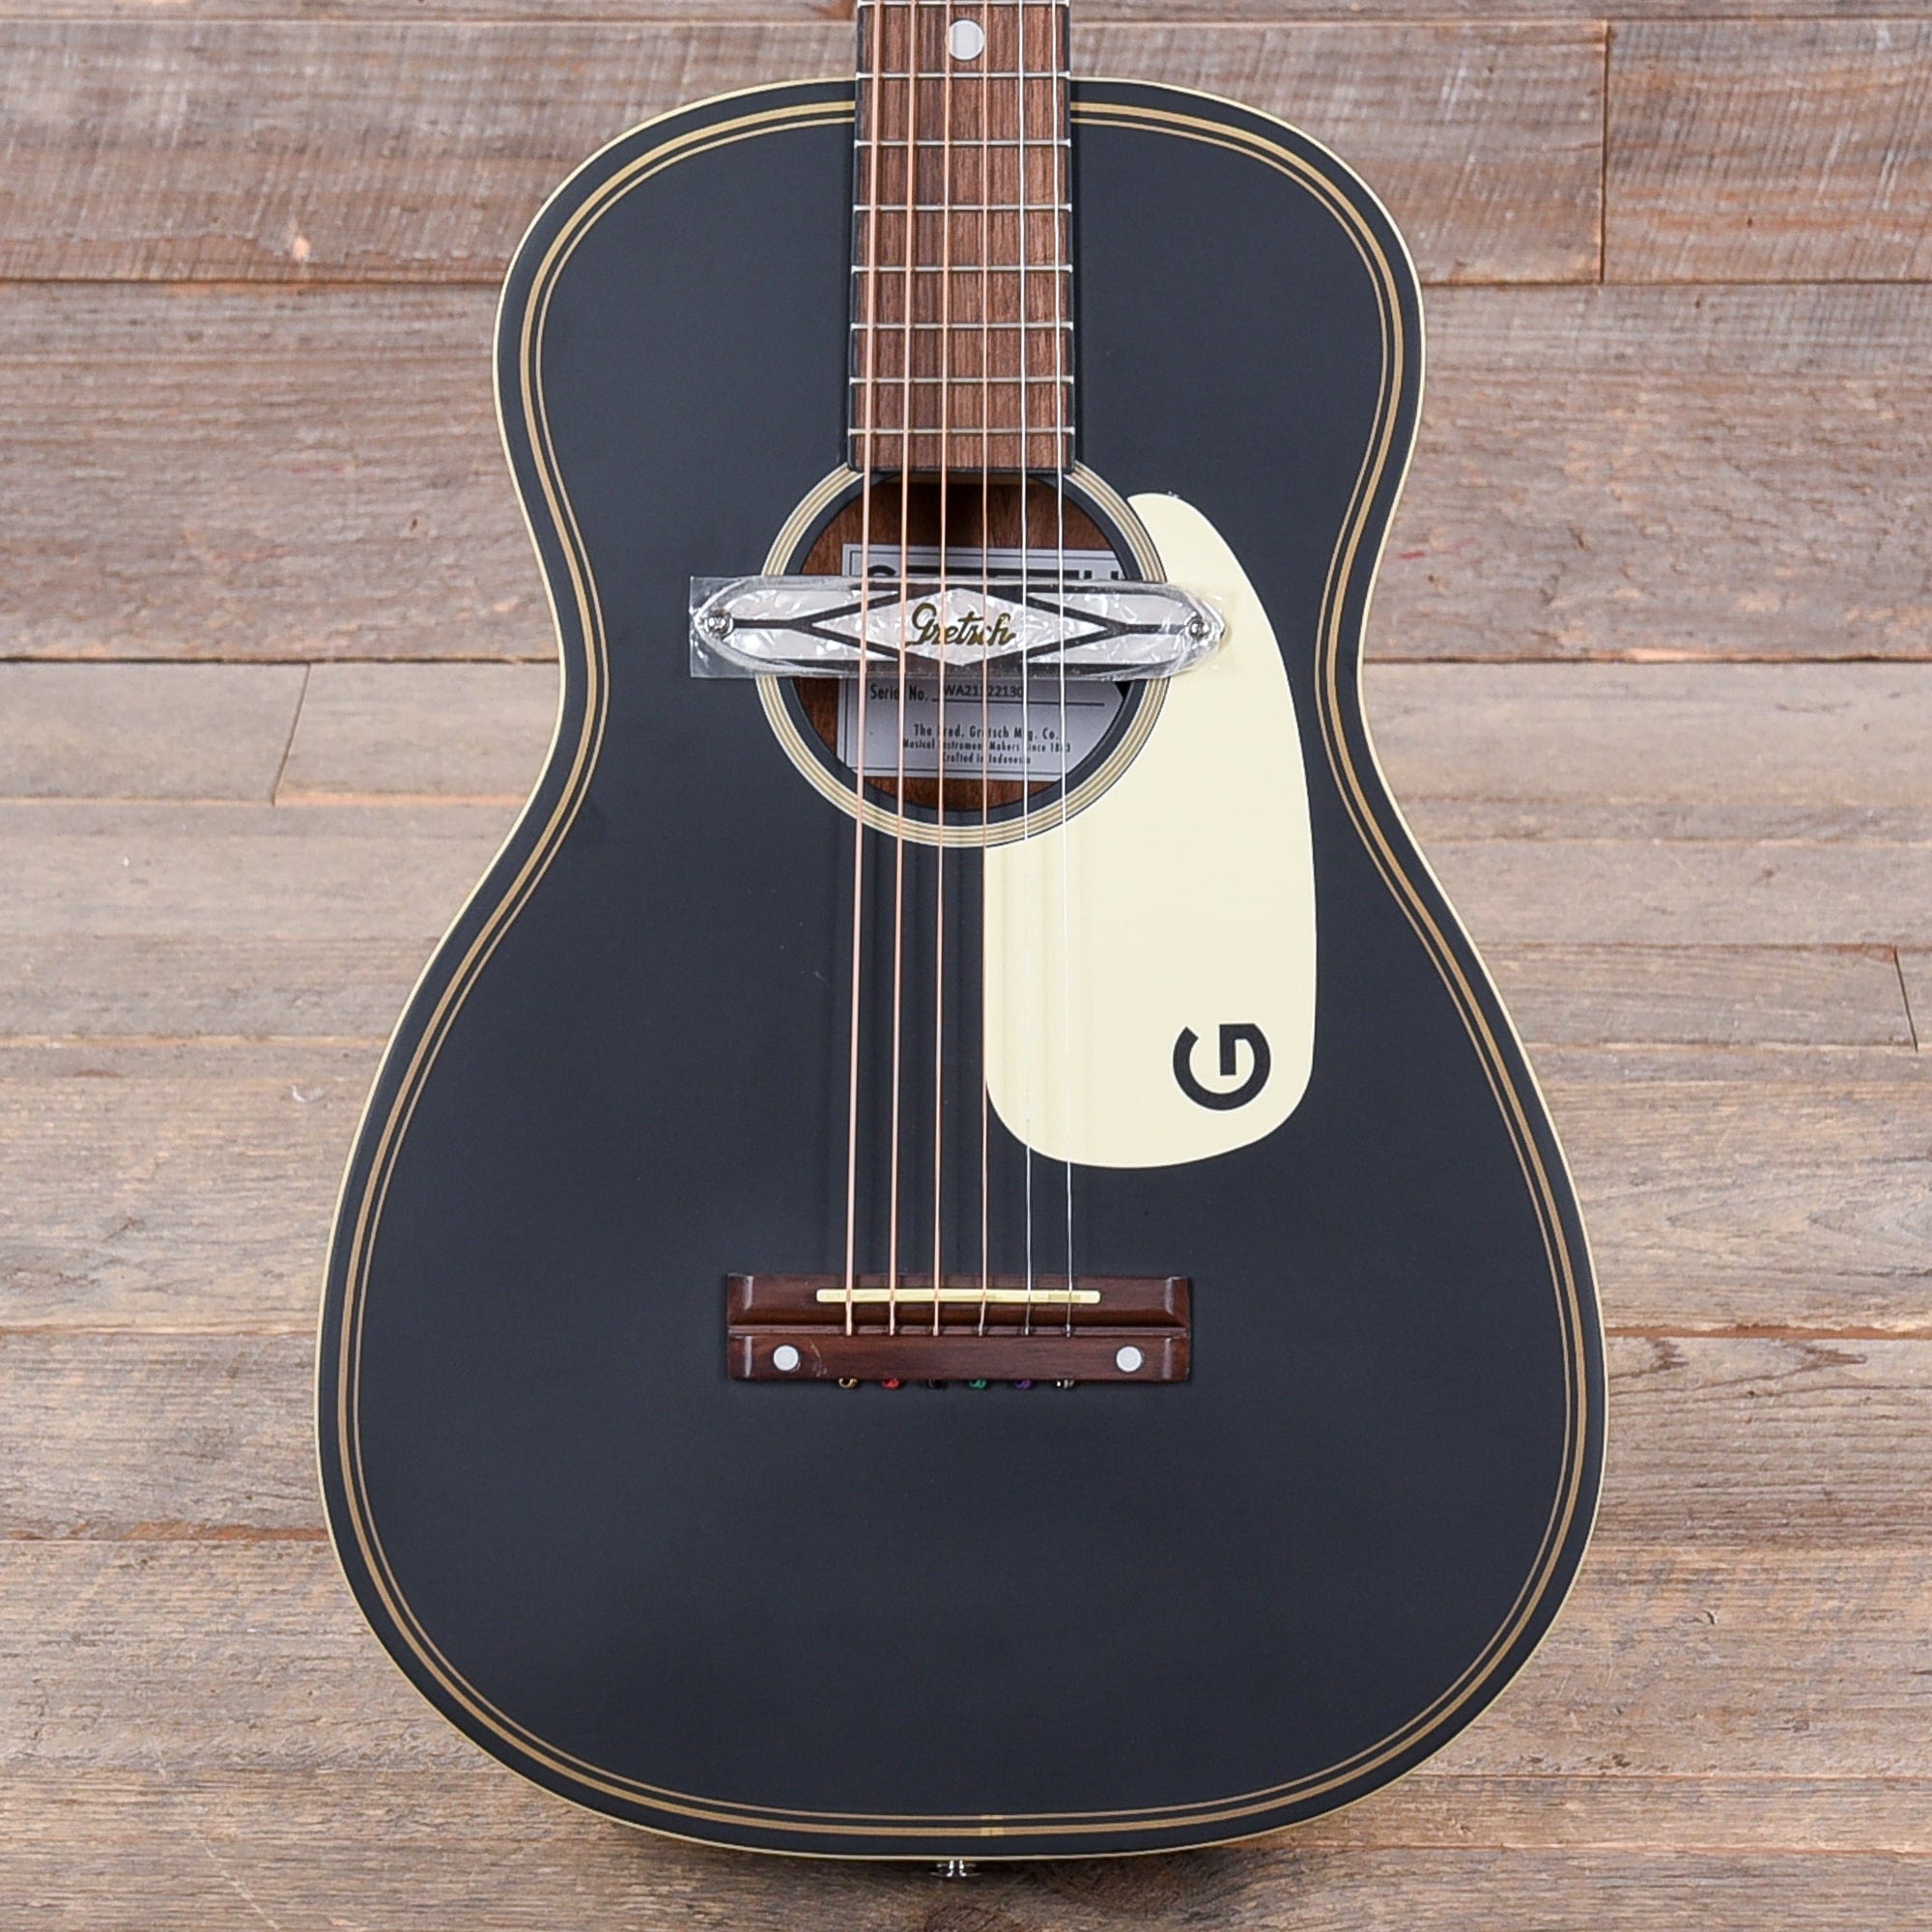 Gretsch G9520E Gin Rickey Acoustic/Electric Smokestack Black w/Soundhole Pickup Acoustic Guitars / Built-in Electronics